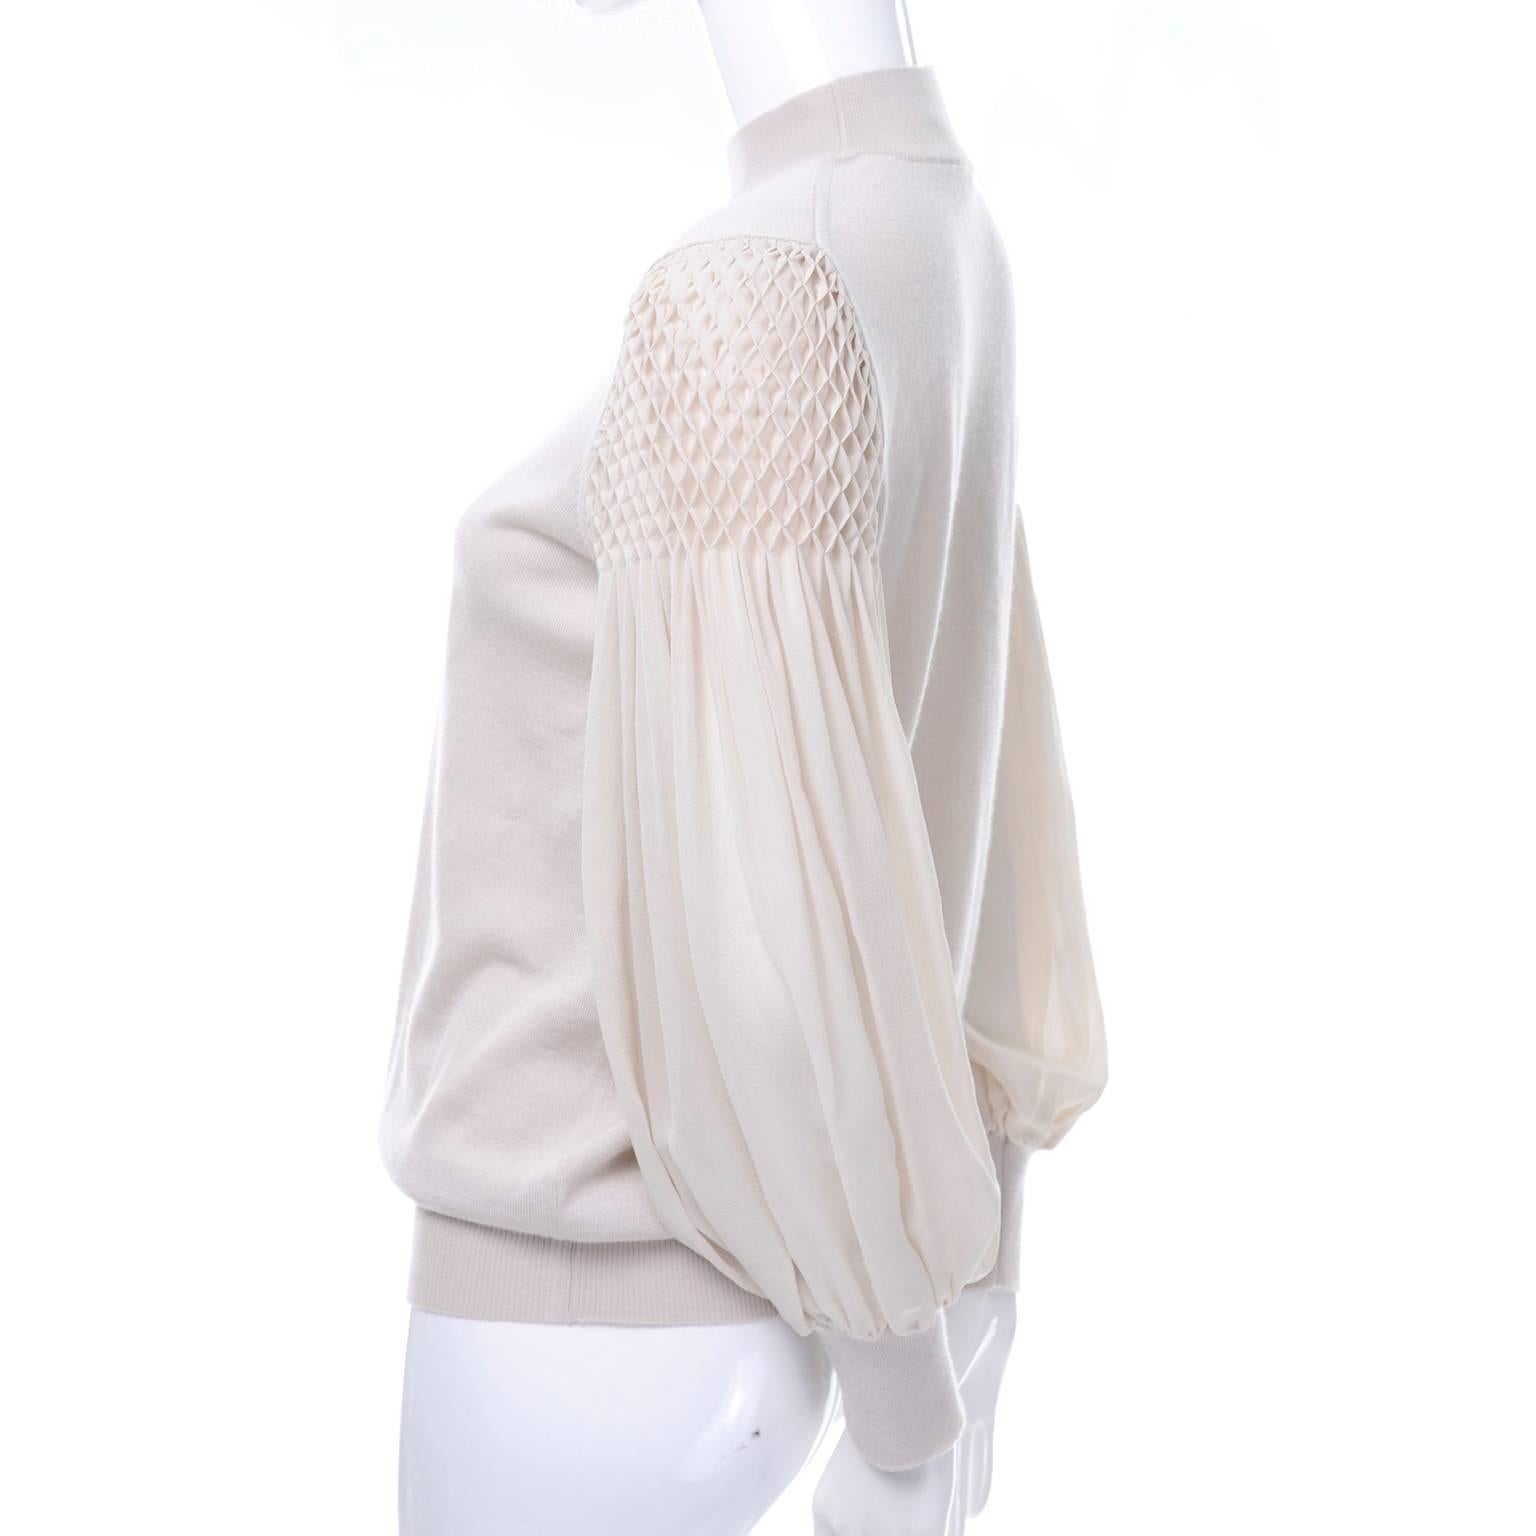 This gorgeous bone or sand colored cashmere sweater is by Luis Vuitton.  The sweater has beautiful puffy silk bishop sleeves that have smocking at the shoulders. There is waffle elastic at the hem, cuff, and neckline. This top was made in Italy and